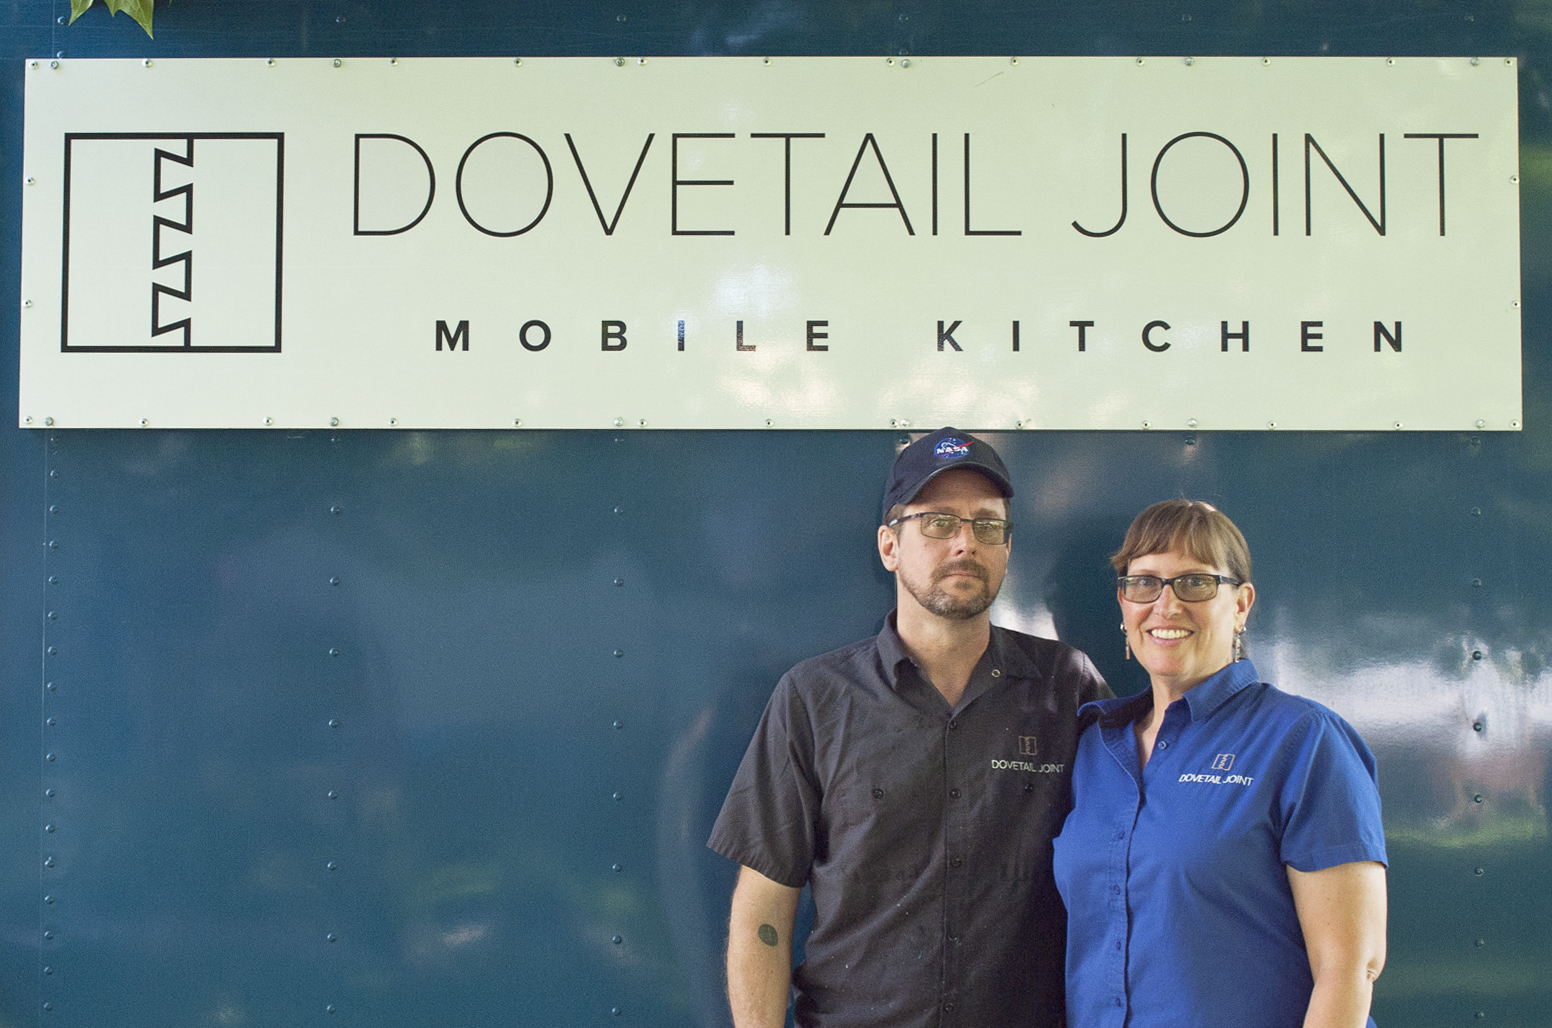 Matt and Maren McGowan started Dovetail Joint Mobile Kitchen two years ago as a way to expand their business into the Tri-Cities. After selling their Goldendale restaurant, the couple put their energy into their food cart and are now preparing to open a new restaurant in Richland’s Uptown Shopping Center at 1368 Jadwin Ave., due to open in this fall.